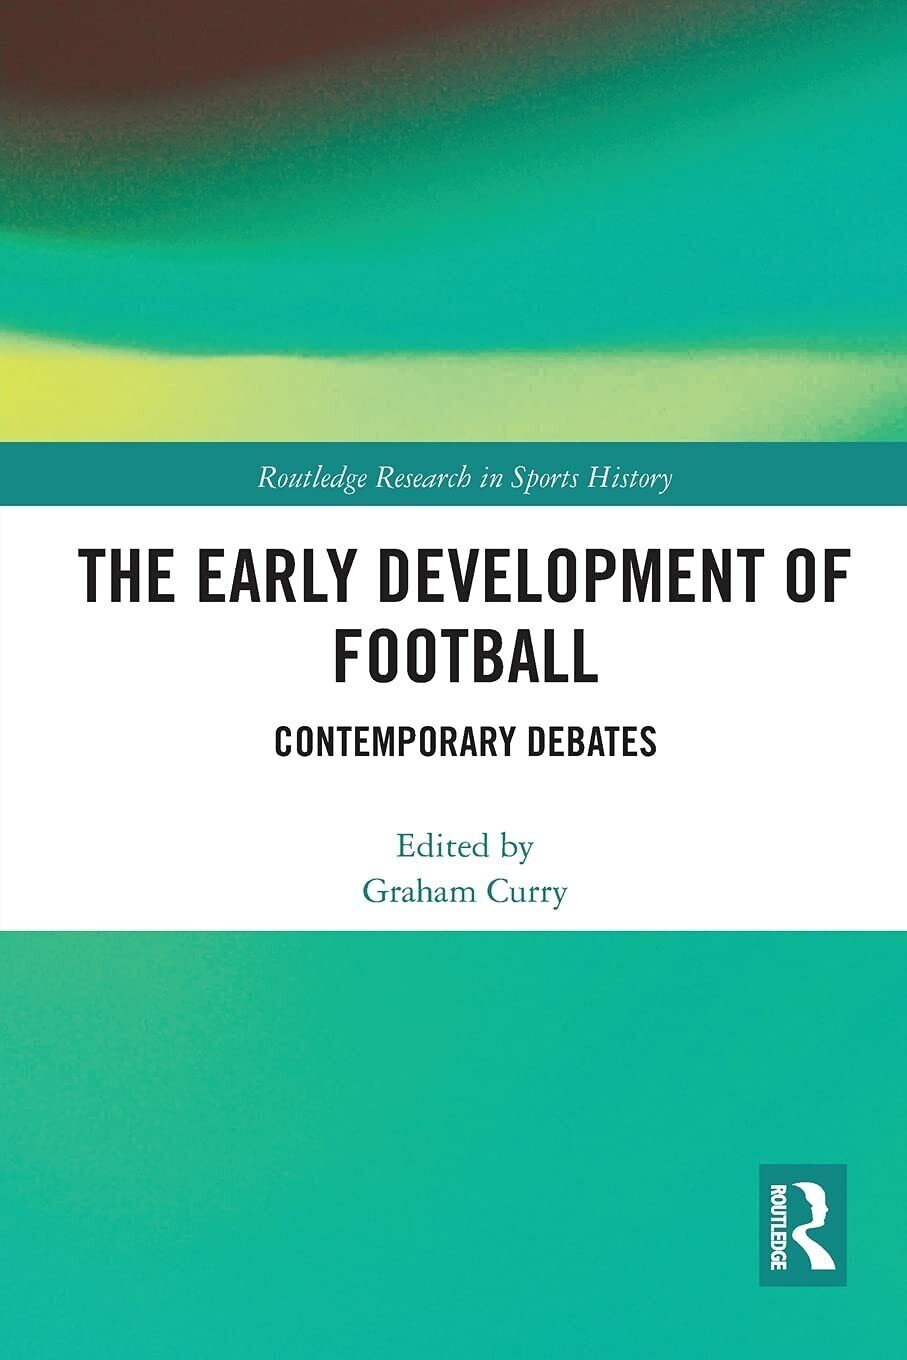 The Early Development of Football - Graham Curry - Routledge, 2021